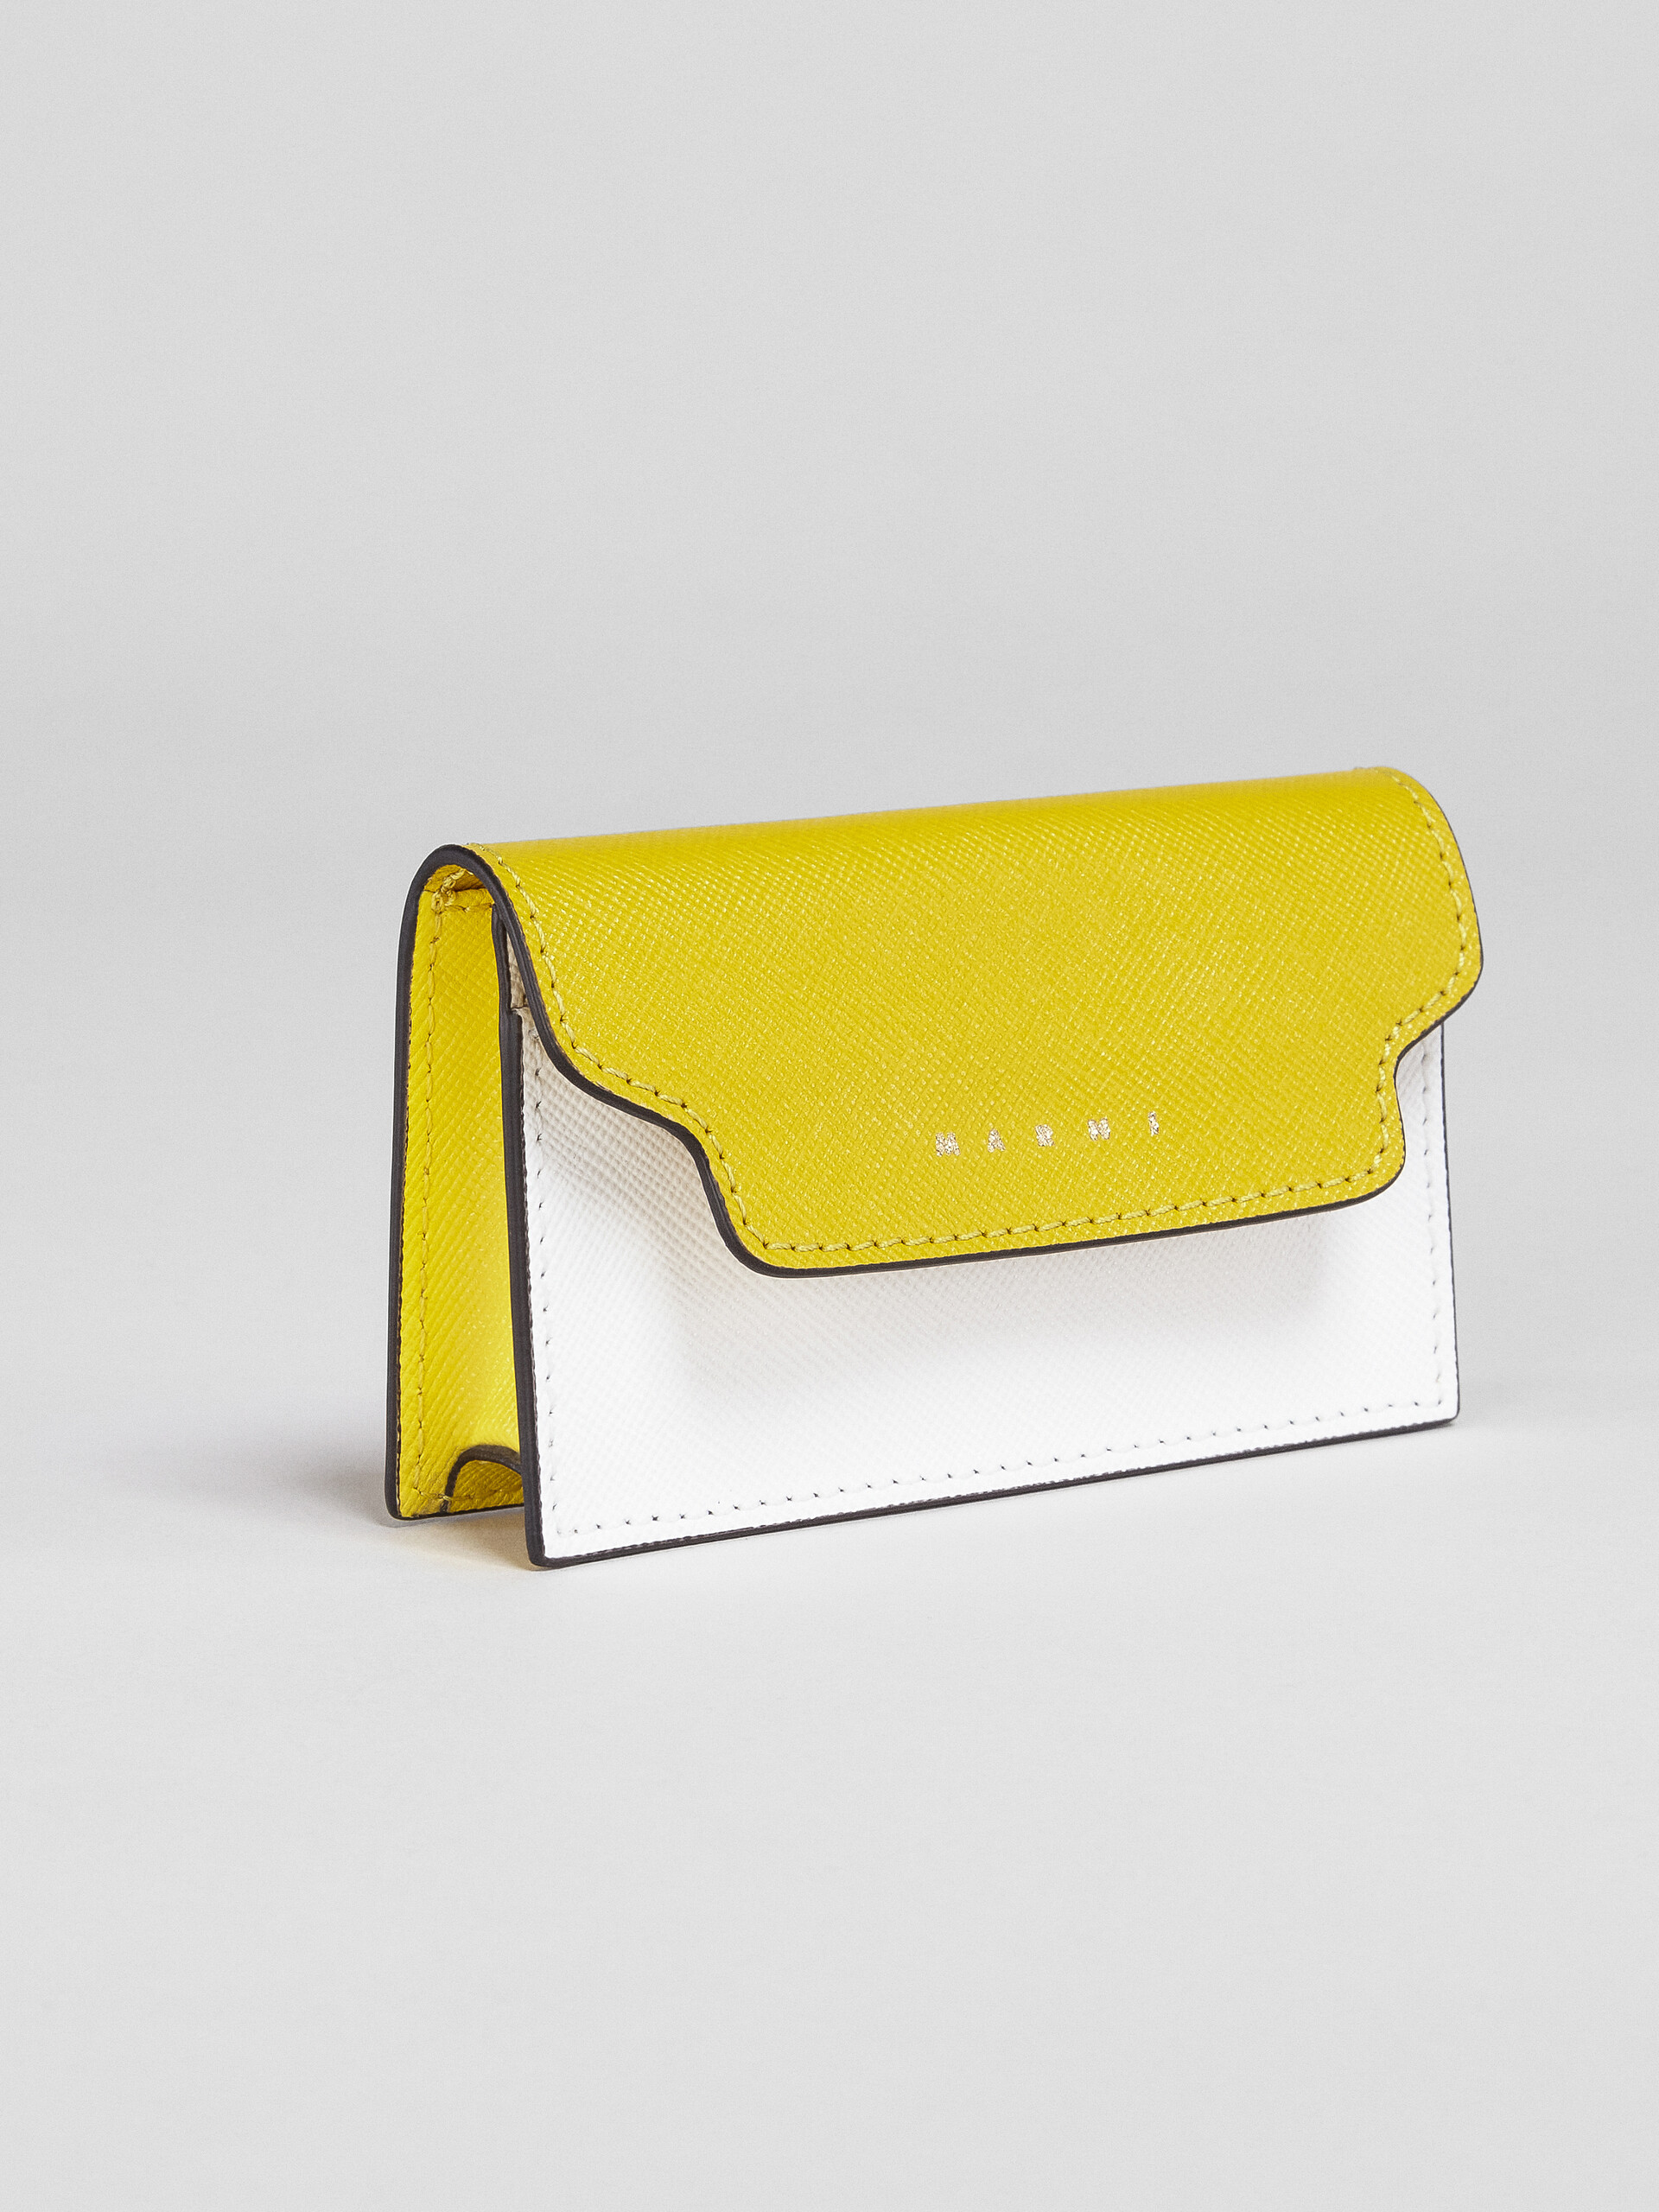 Tone on tone yellow and white saffiano business card case - Wallets - Image 4